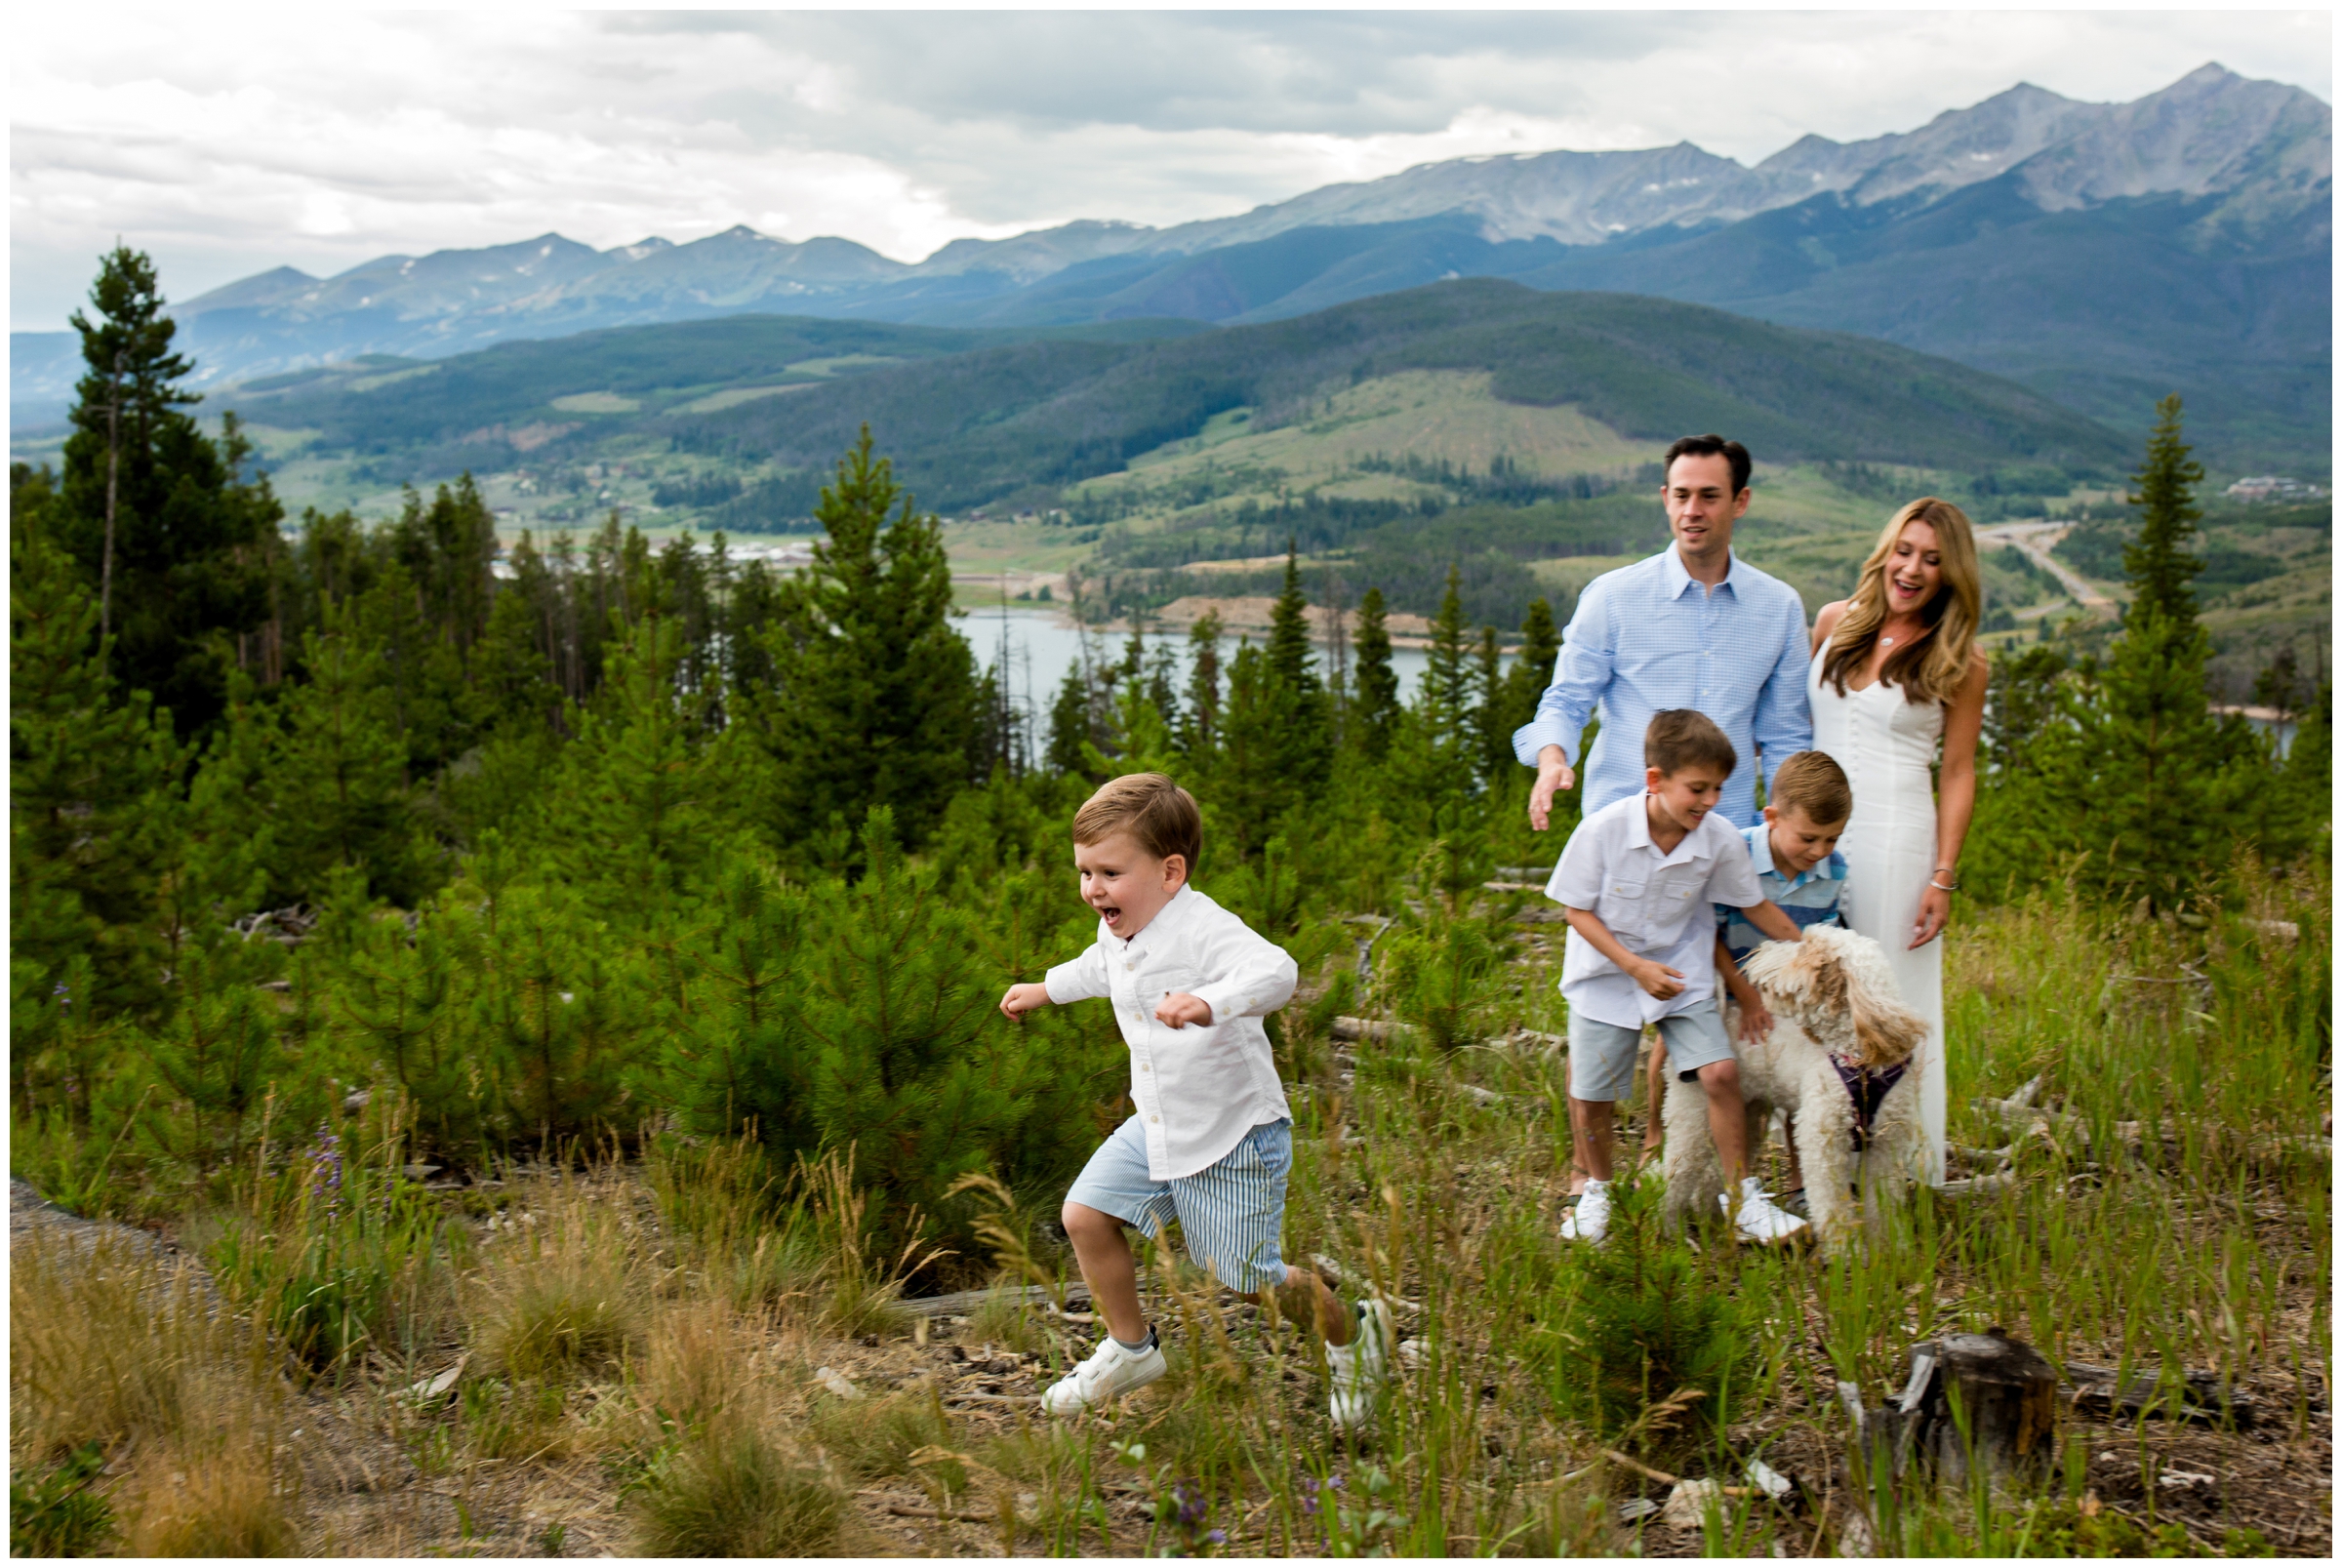 Summit County family photos by Breckenridge Colorado portrait photographer Plum Pretty Photography. Sapphire Point Overlook summer family pictures.